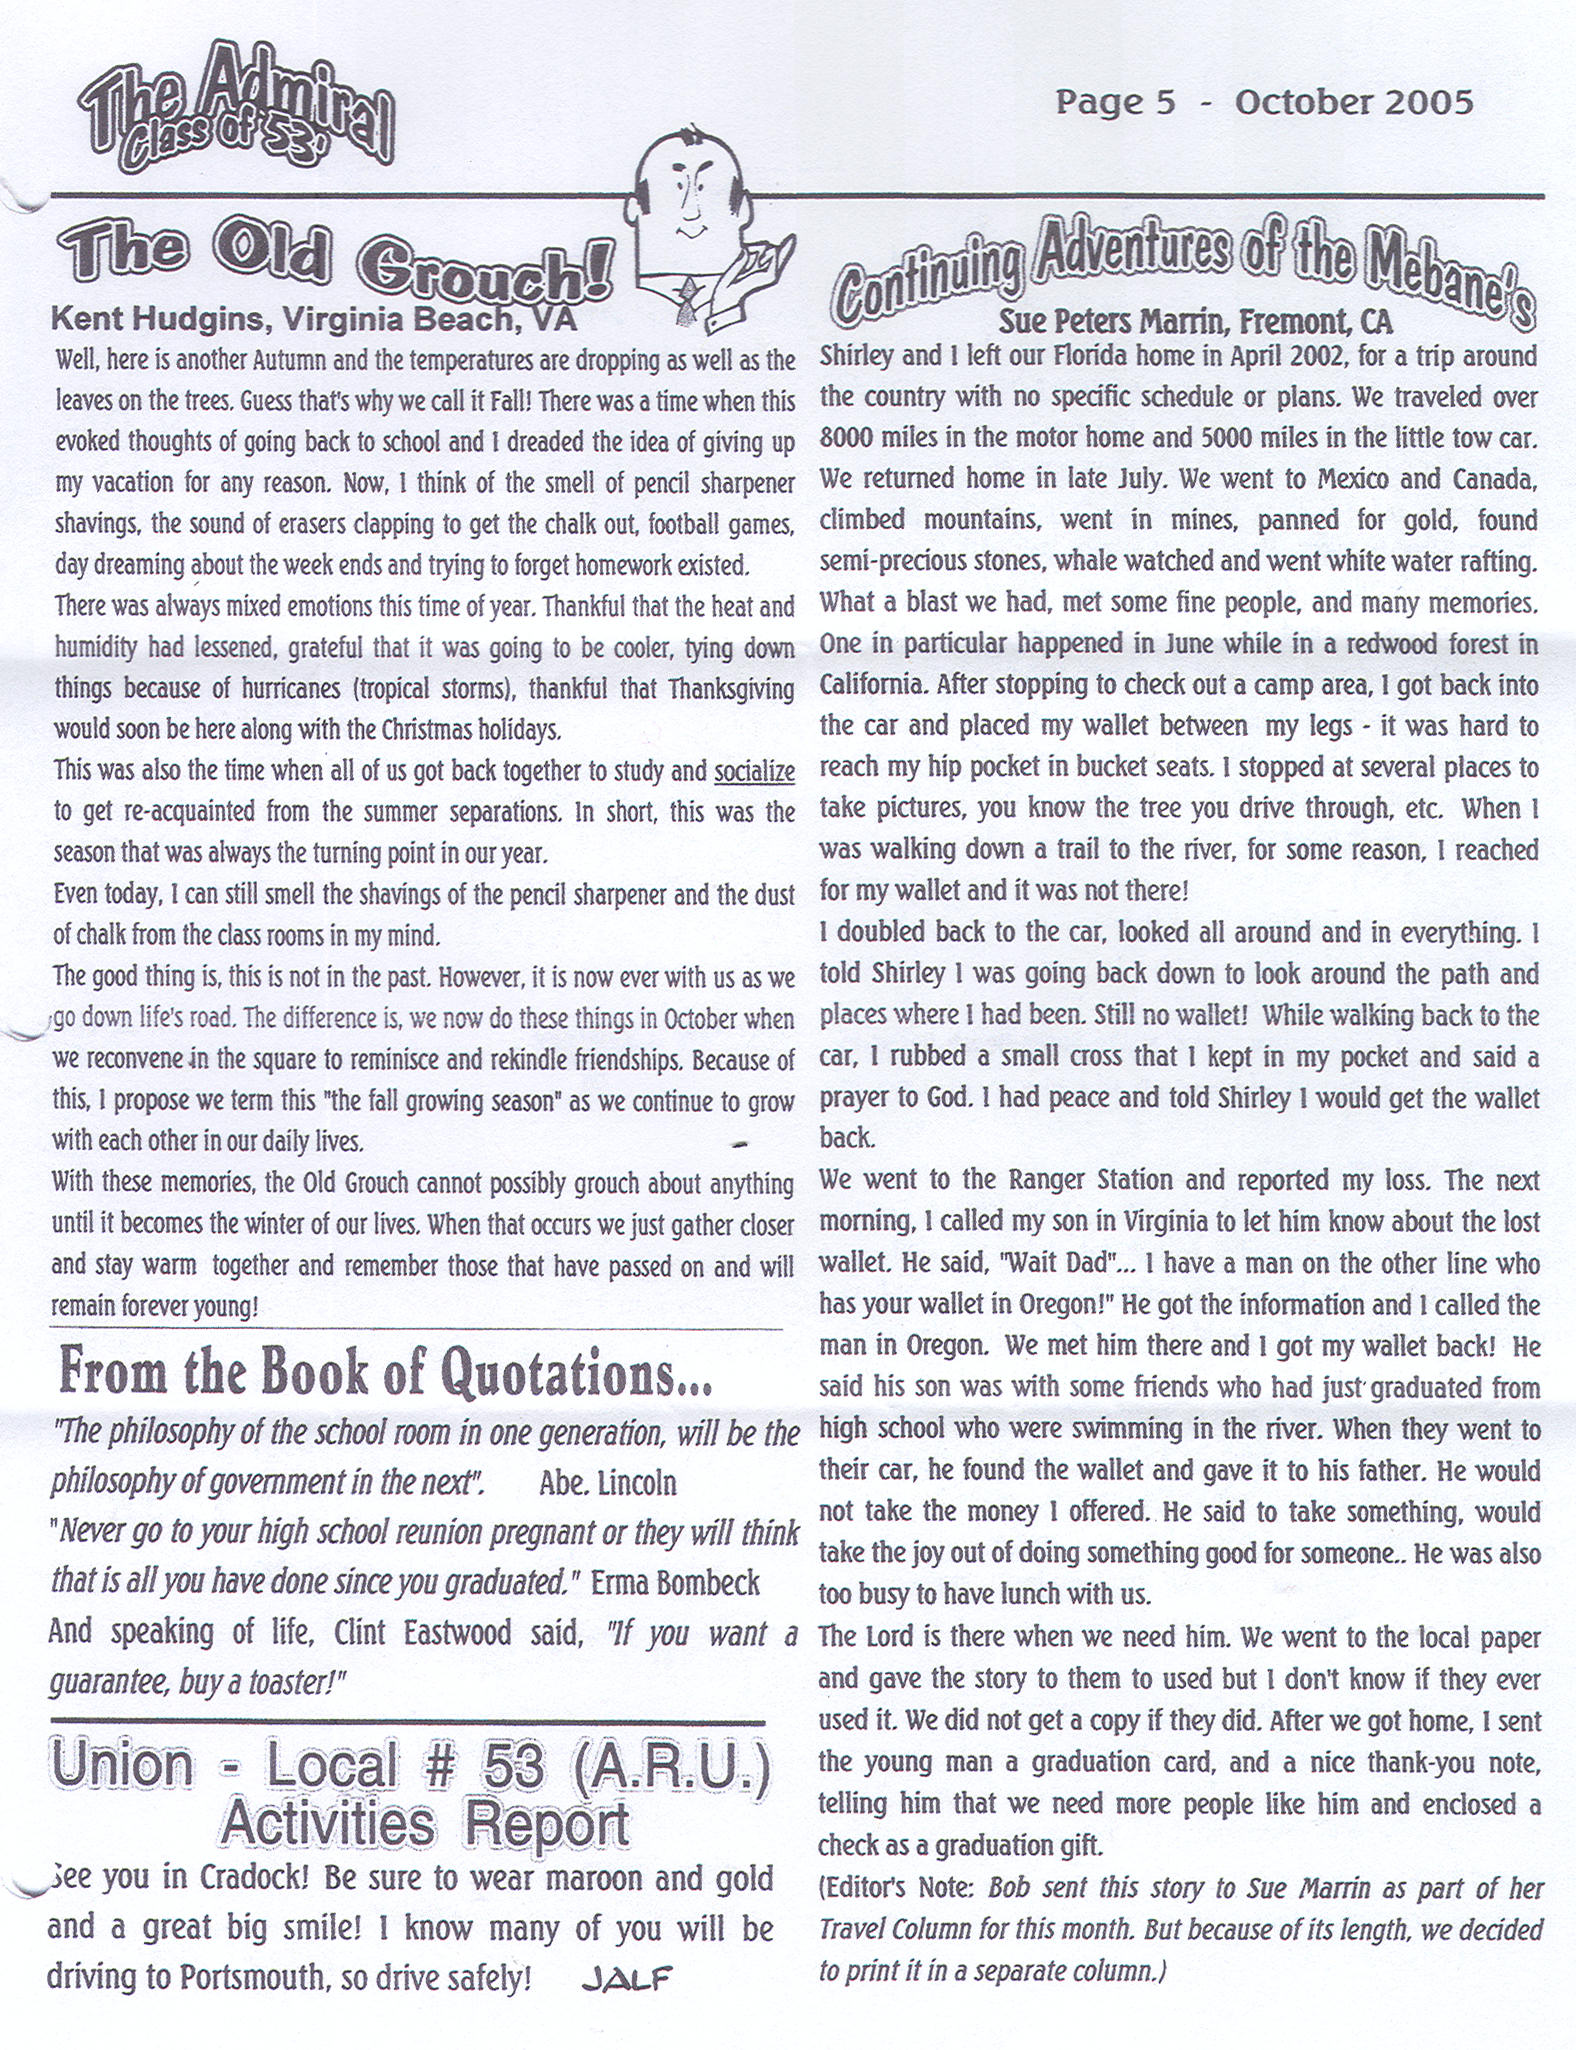 The Admiral - October 2005 - pg. 5